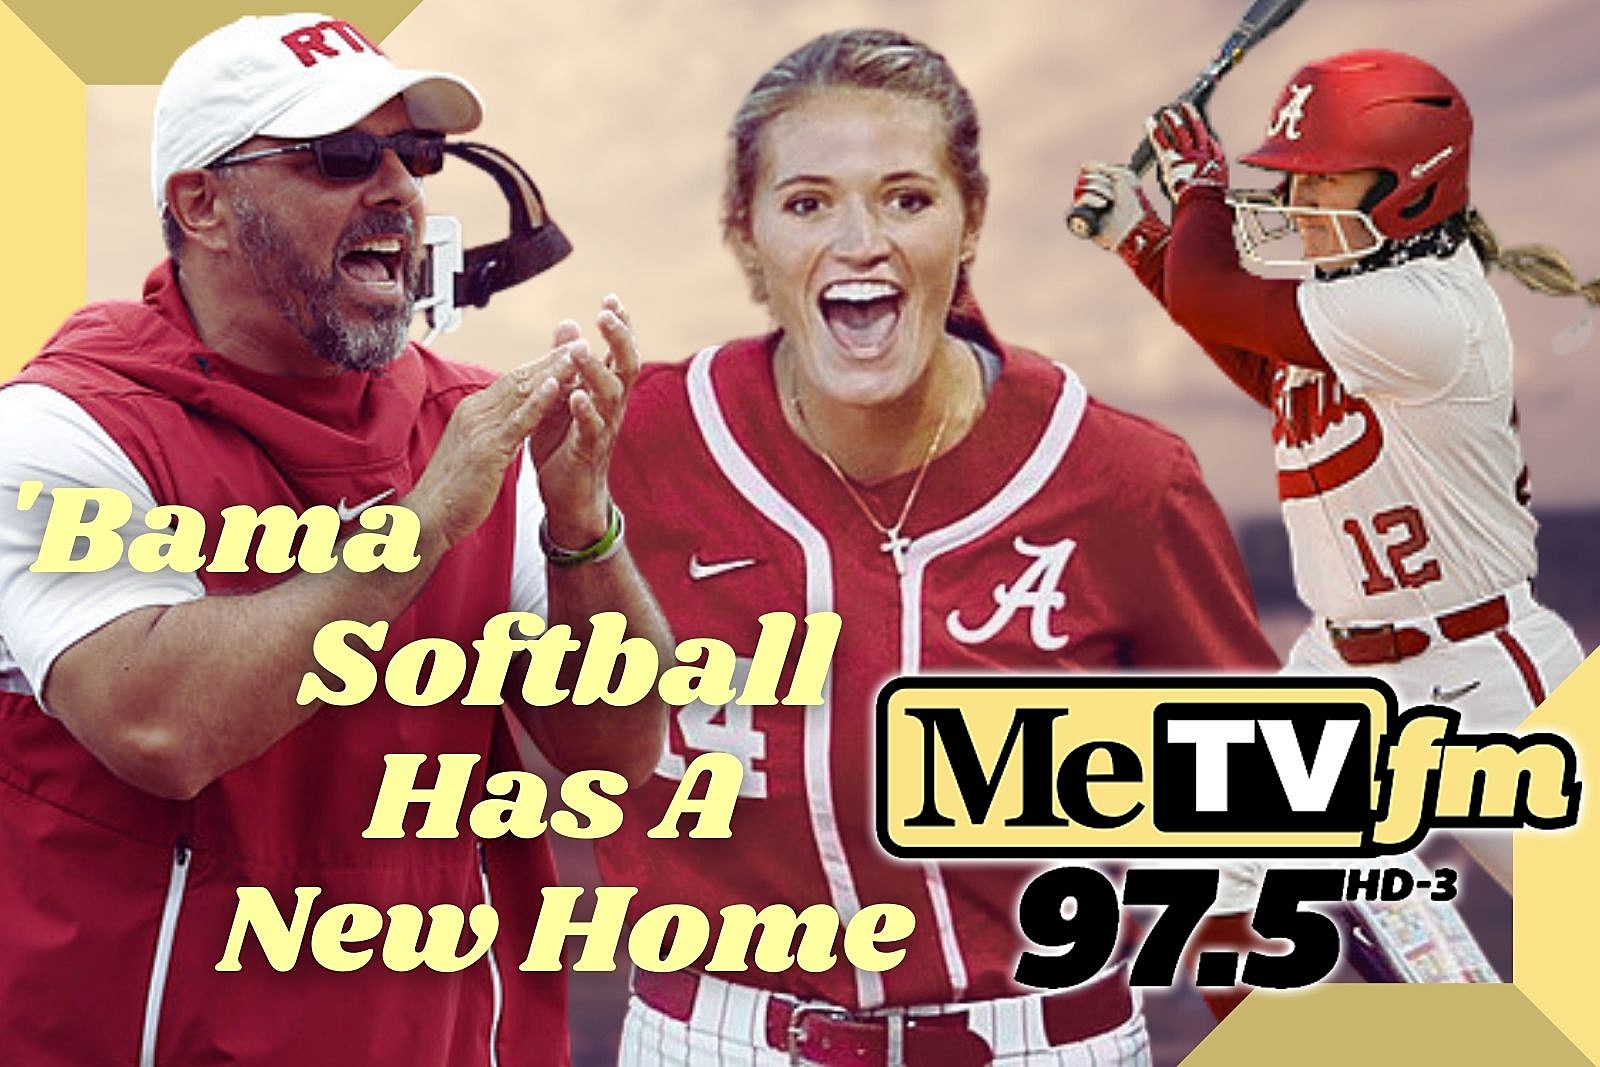 Catching up with the Crimson Tide: Softball, baseball both on a